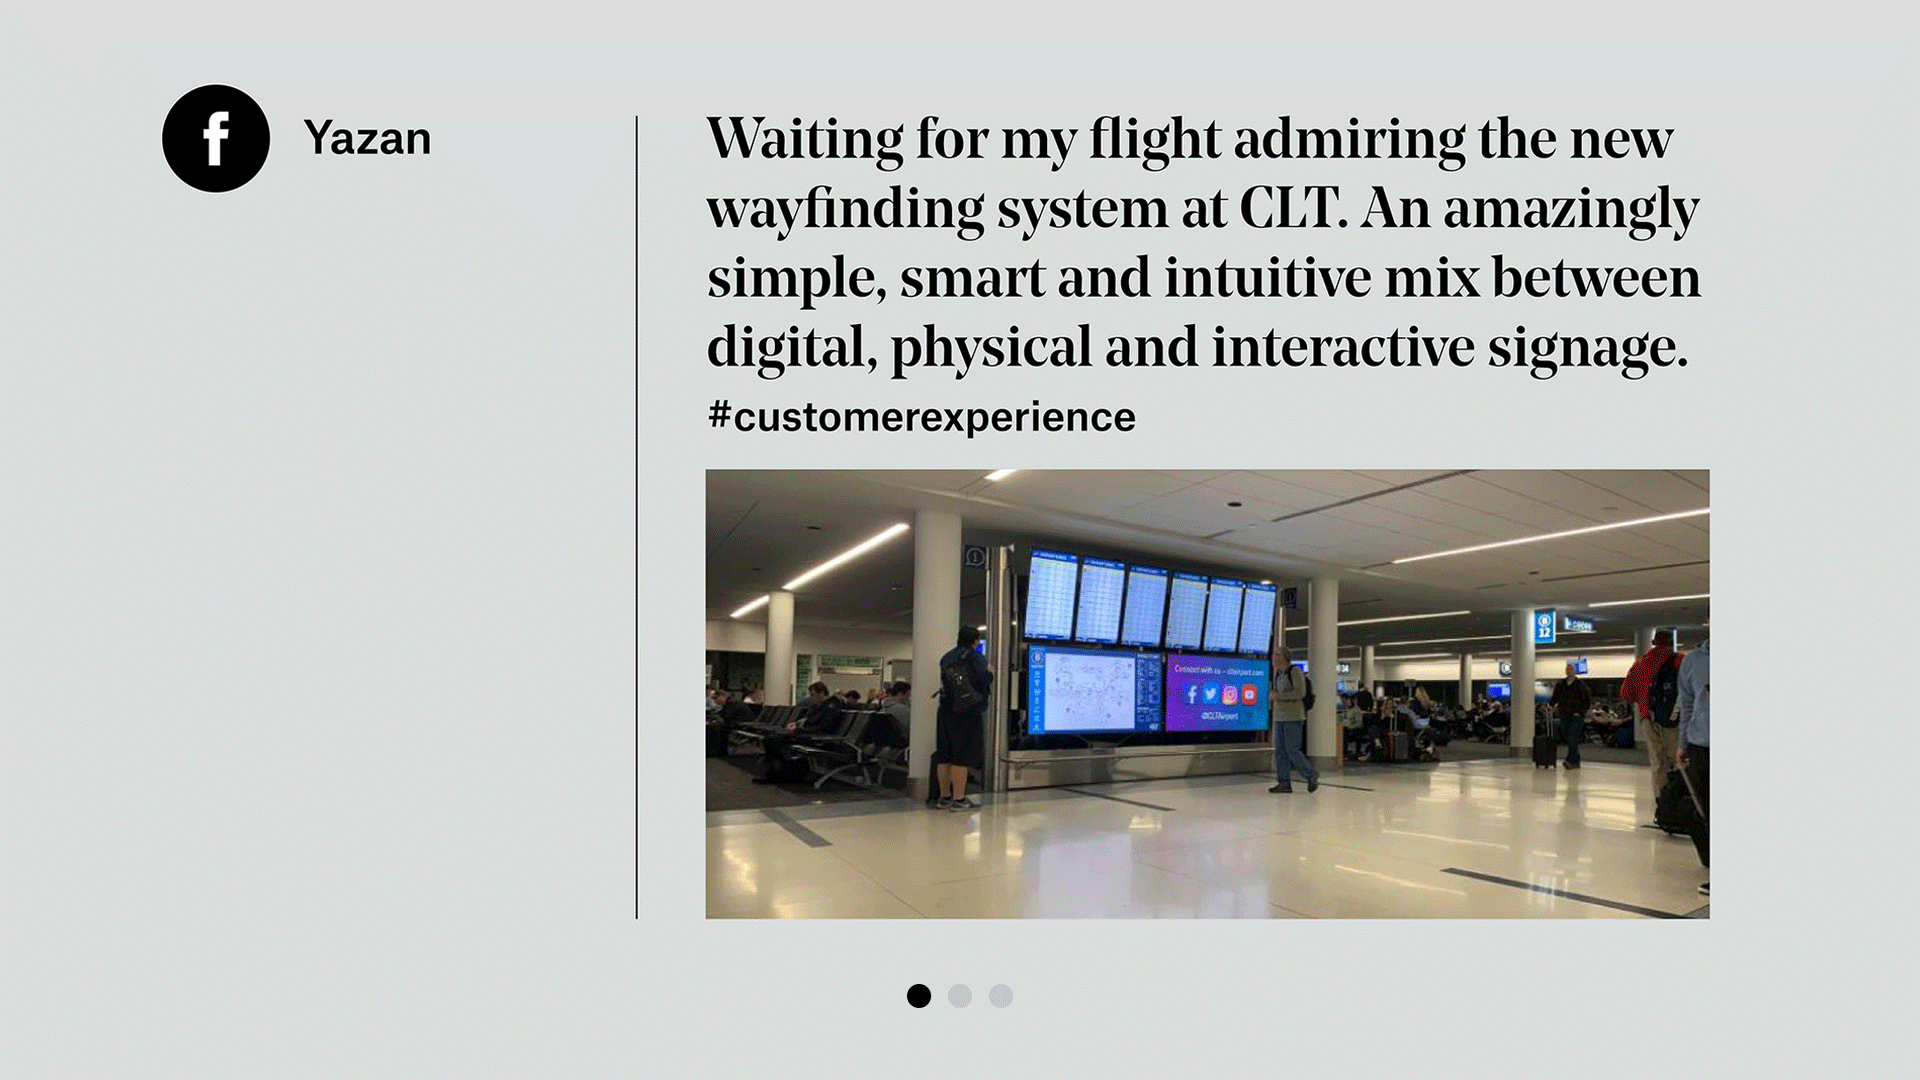 an animation displaying feedback from passengers via social media about Charlotte Douglas International Airport’s wayfinding signage